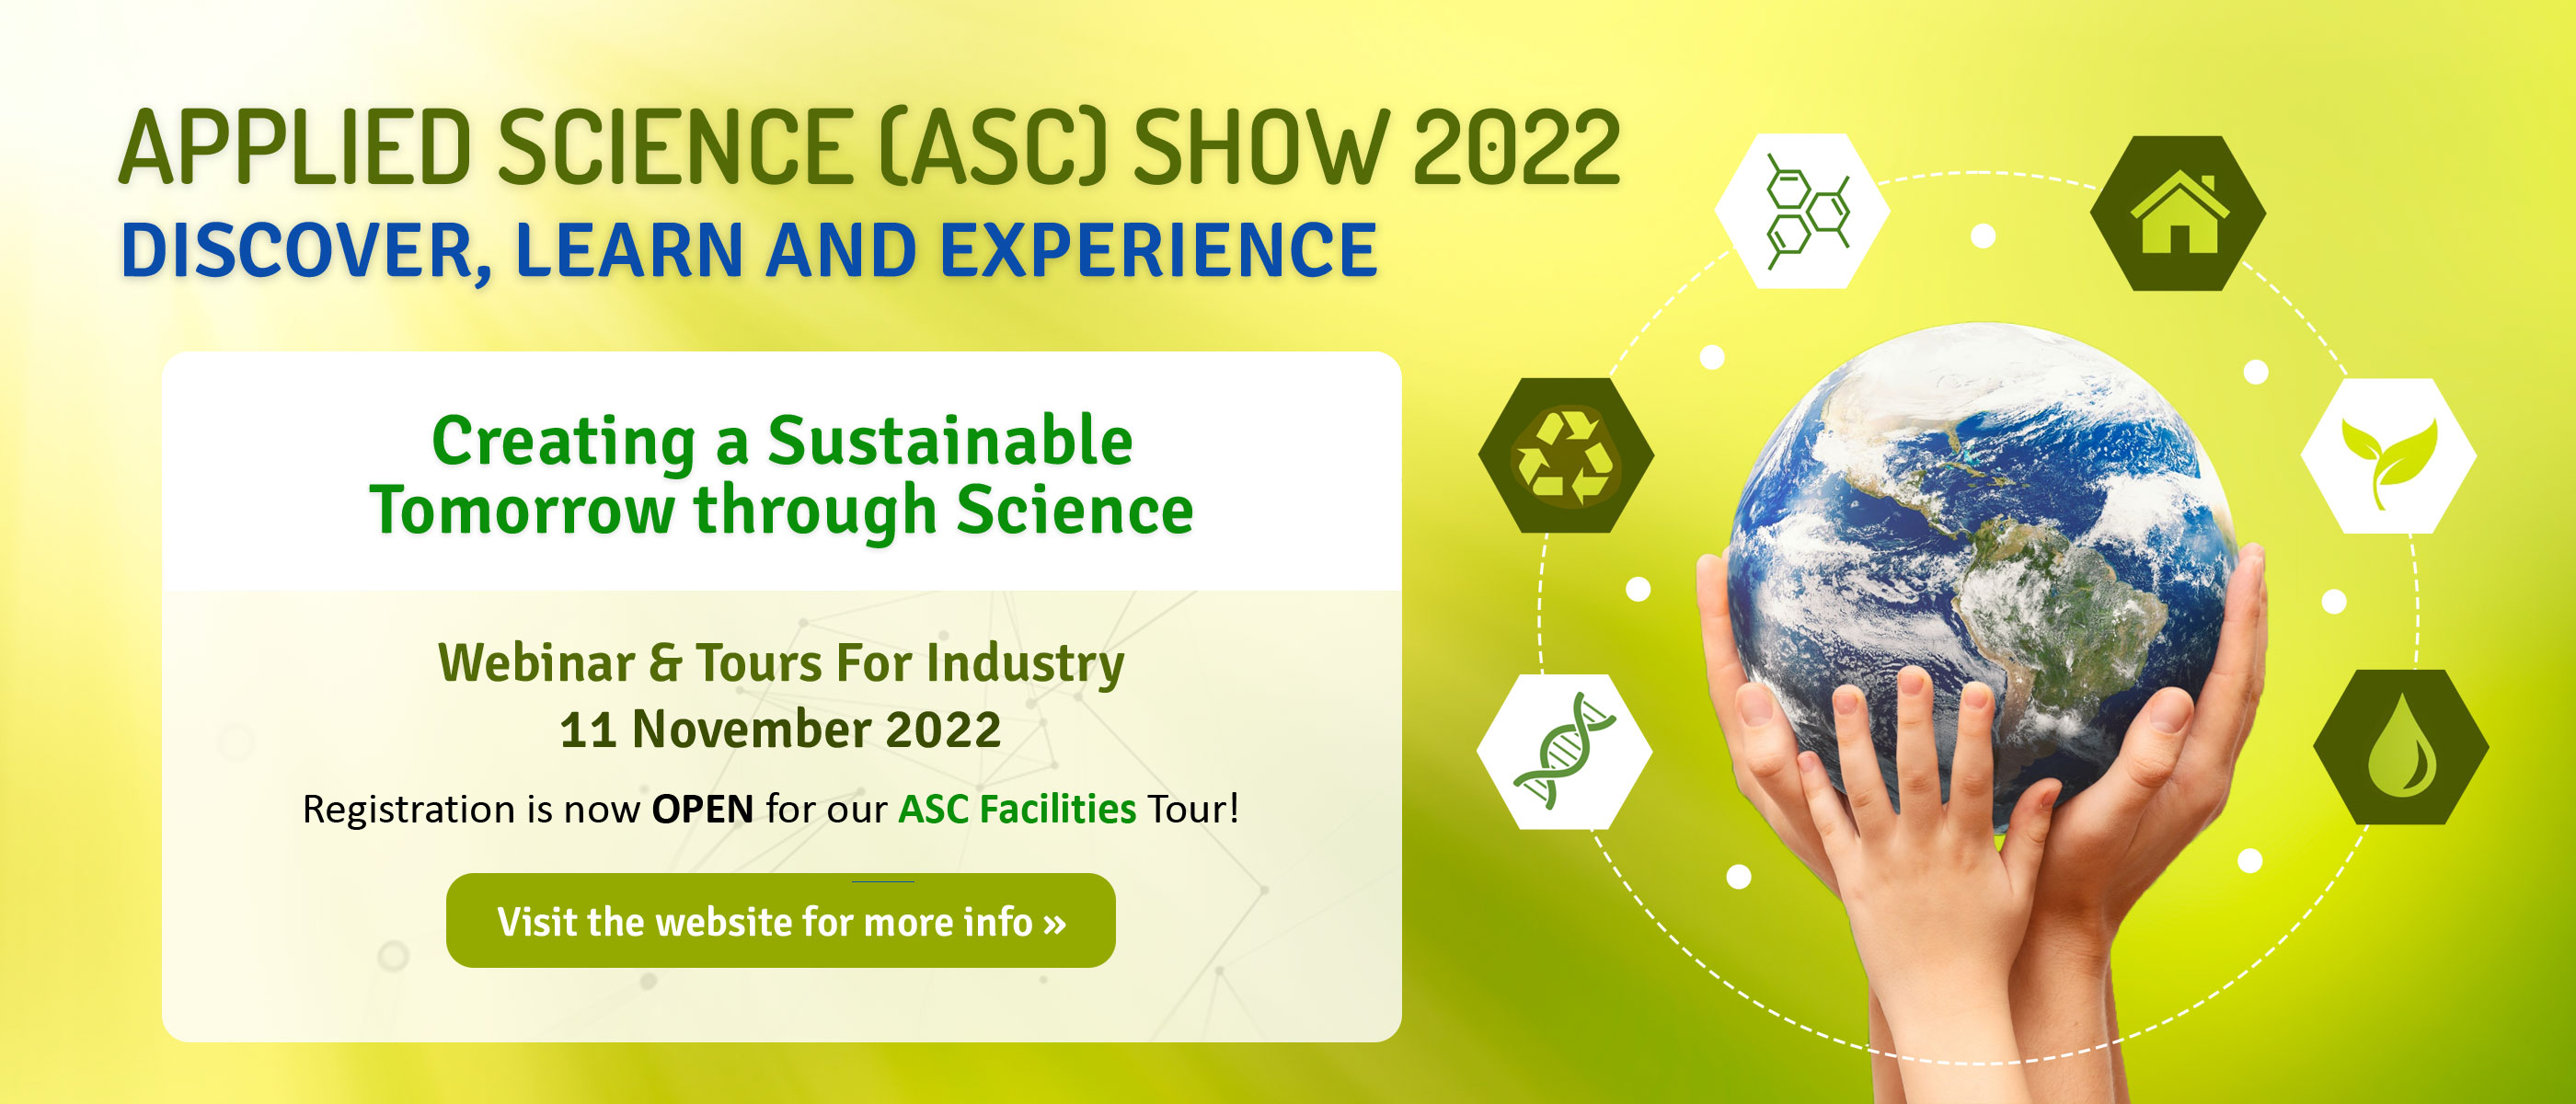 Applied Science (ASC) Show 2022